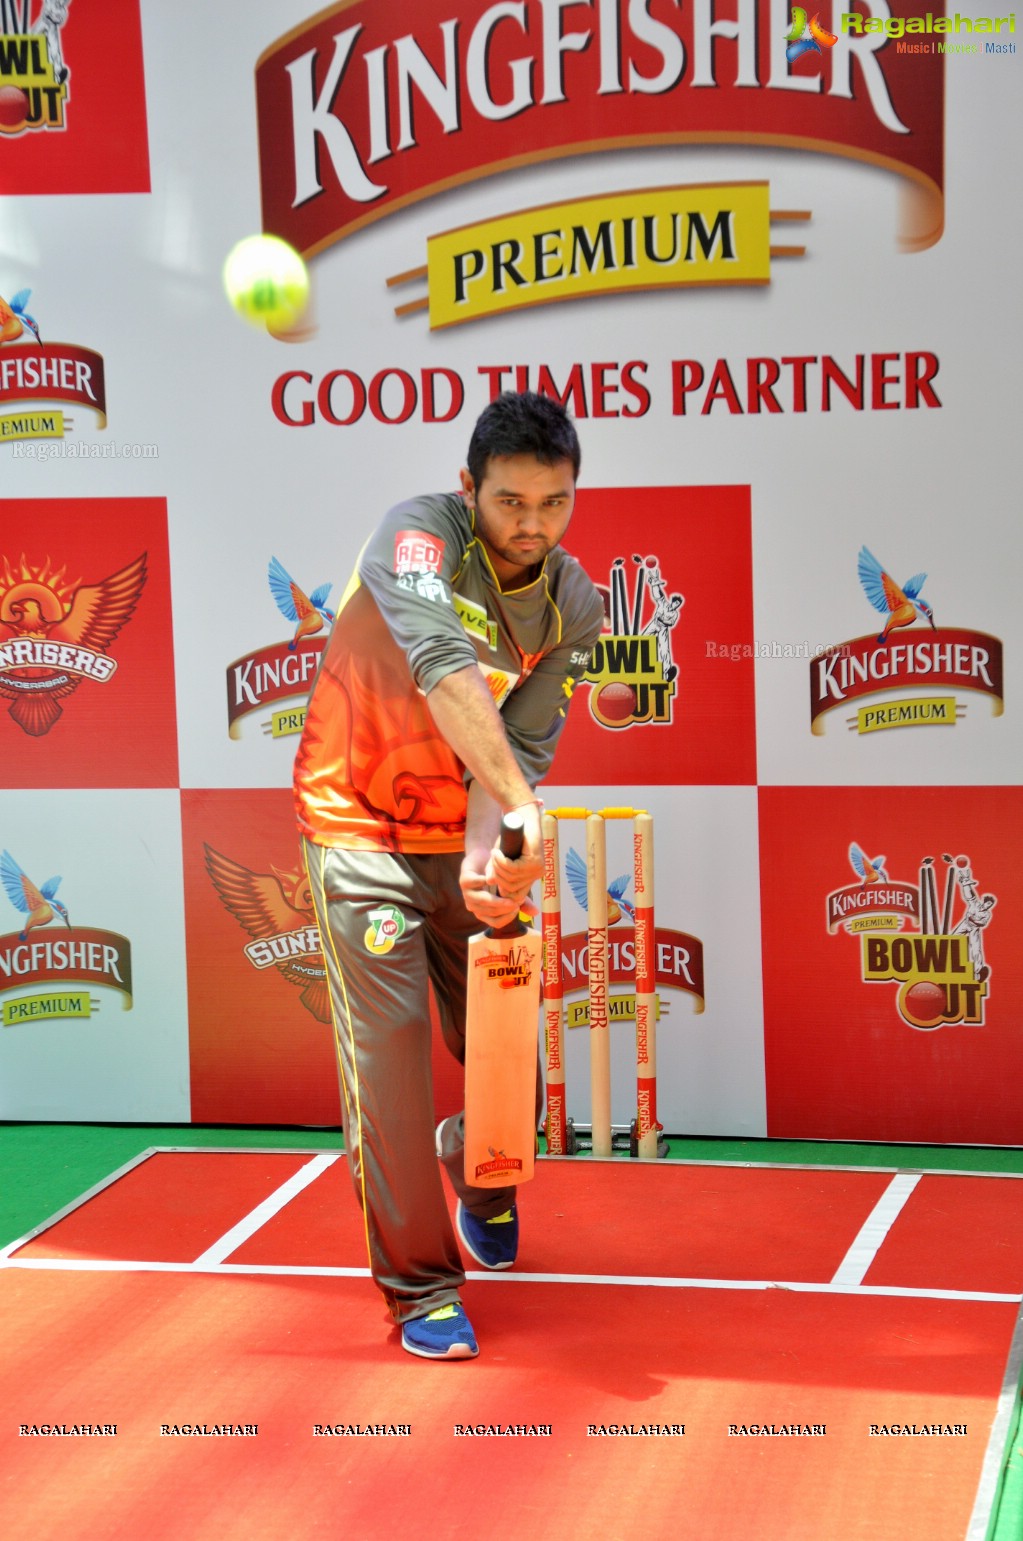 Kingfisher Premium presents ‘Bowl Out’ at  City Centre Mall, Hyderabad